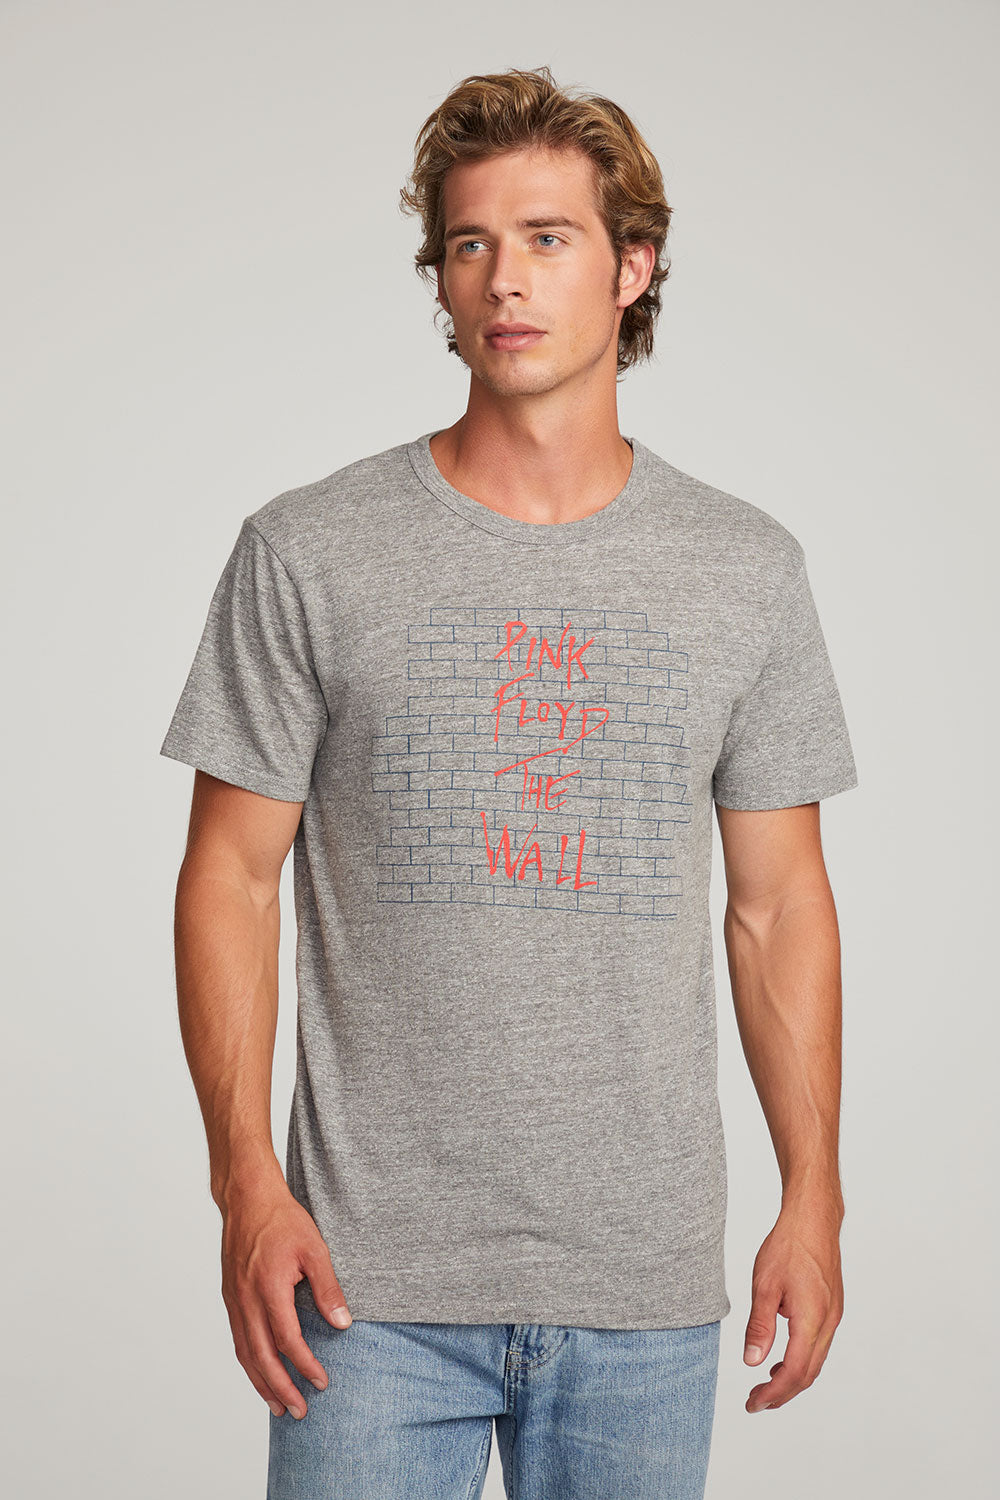 Pink Floyd - The Wall Mens Tee MENS chaserbrand